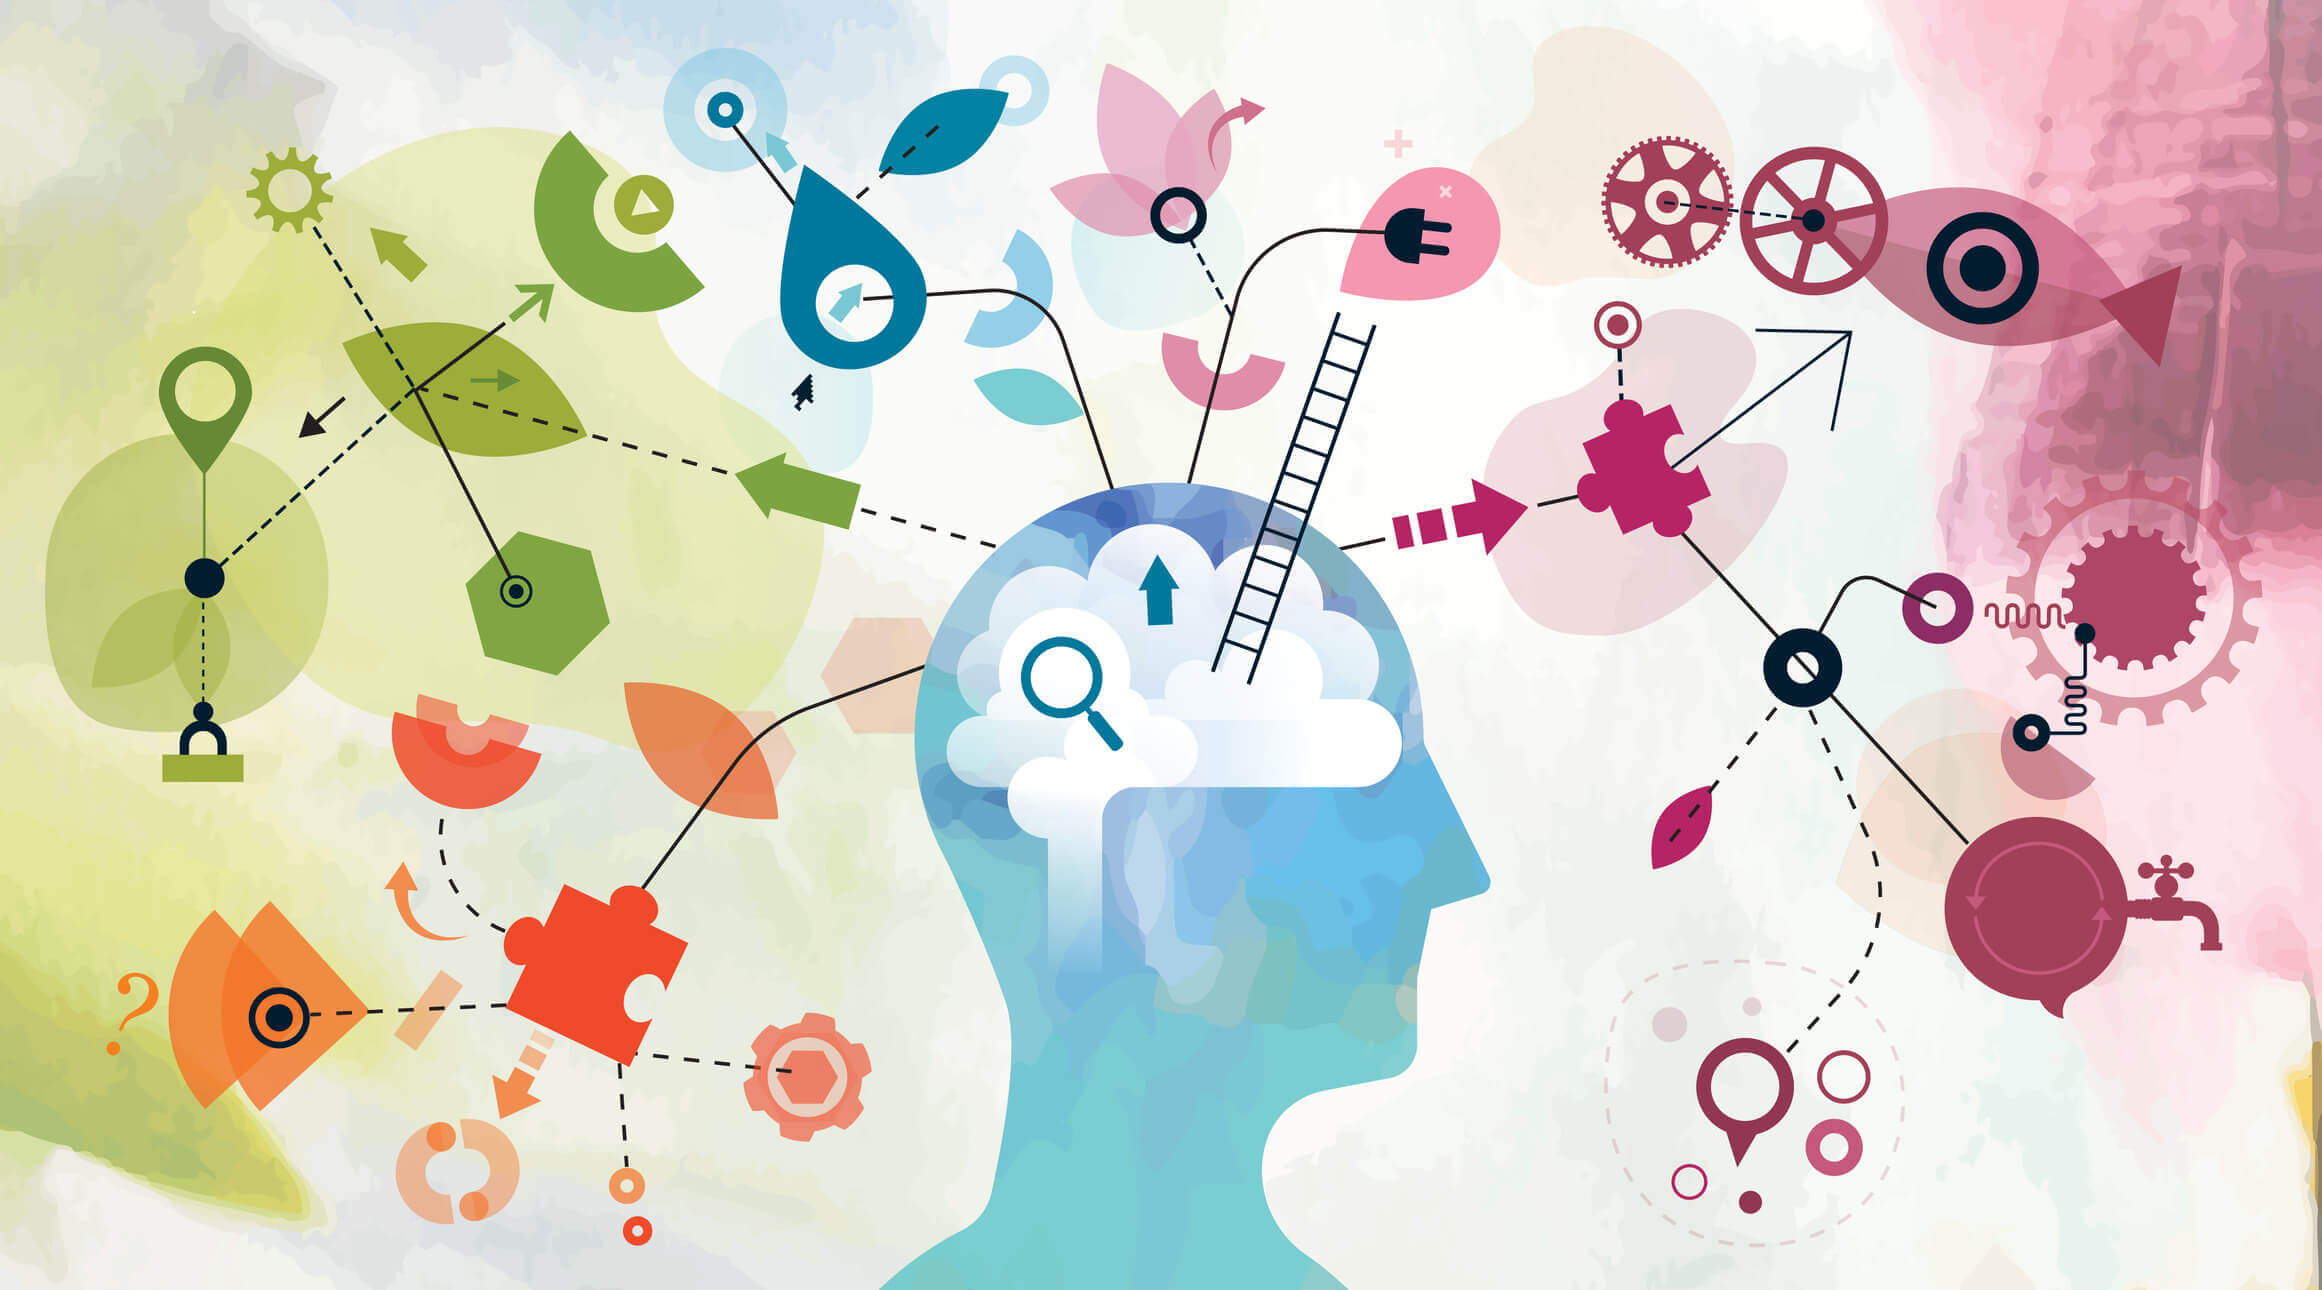 An Illustration representing concept mapping. It shows an outline of a person’s head with many different thoughts coming out of it.